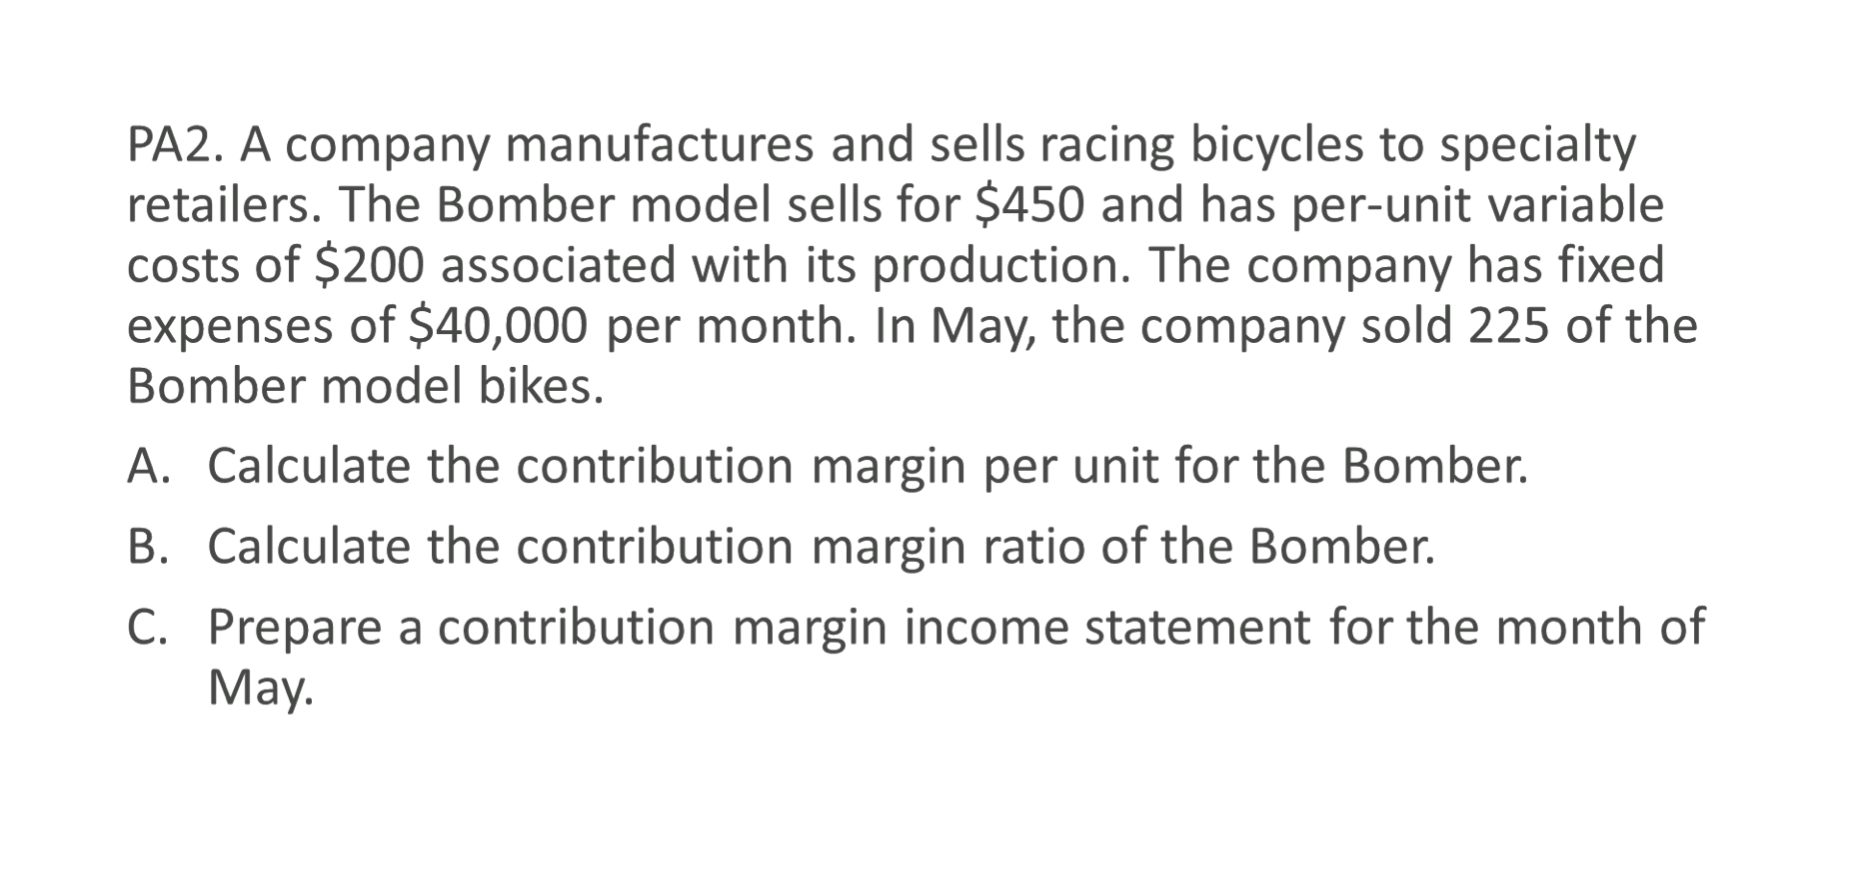 PA2. A company manufactures and sells racing bicycles to specialty
retailers. The Bomber model sells for $450 and has per-unit variable
costs of $200 associated with its production. The company has fixed
expenses of $40,000 per month. In May, the company sold 225 of the
Bomber model bikes.
A. Calculate the contribution margin per unit for the Bomber.
B. Calculate the contribution margin ratio of the Bomber.
C. Prepare a contribution margin income statement for the month of
May.
